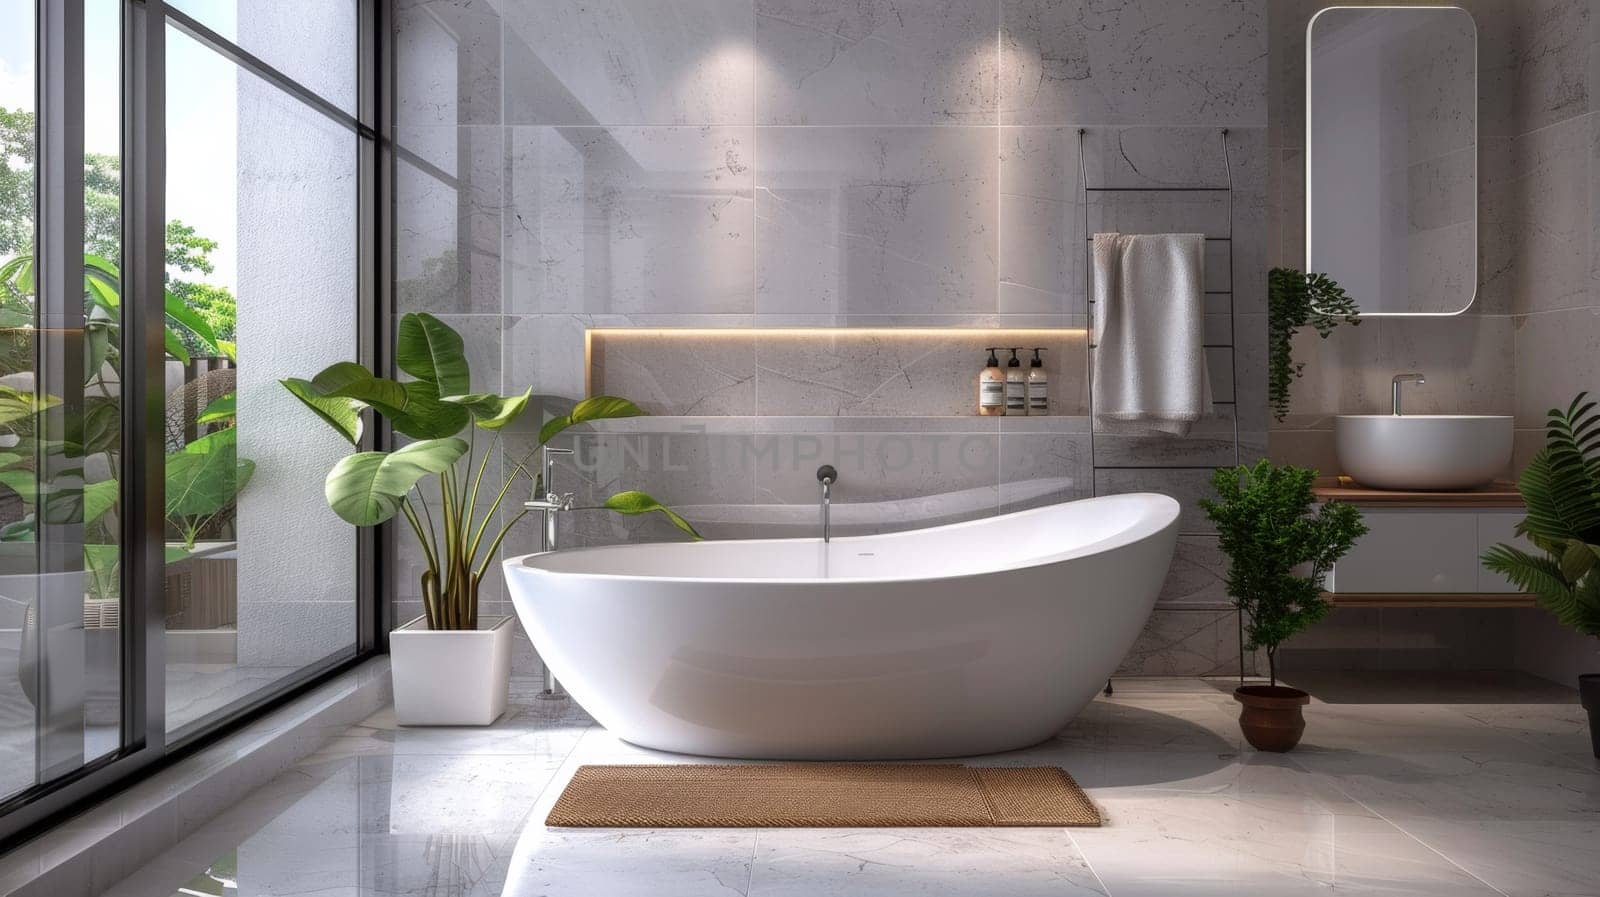 A bathroom with a large bathtub and plants in the corner, AI by starush